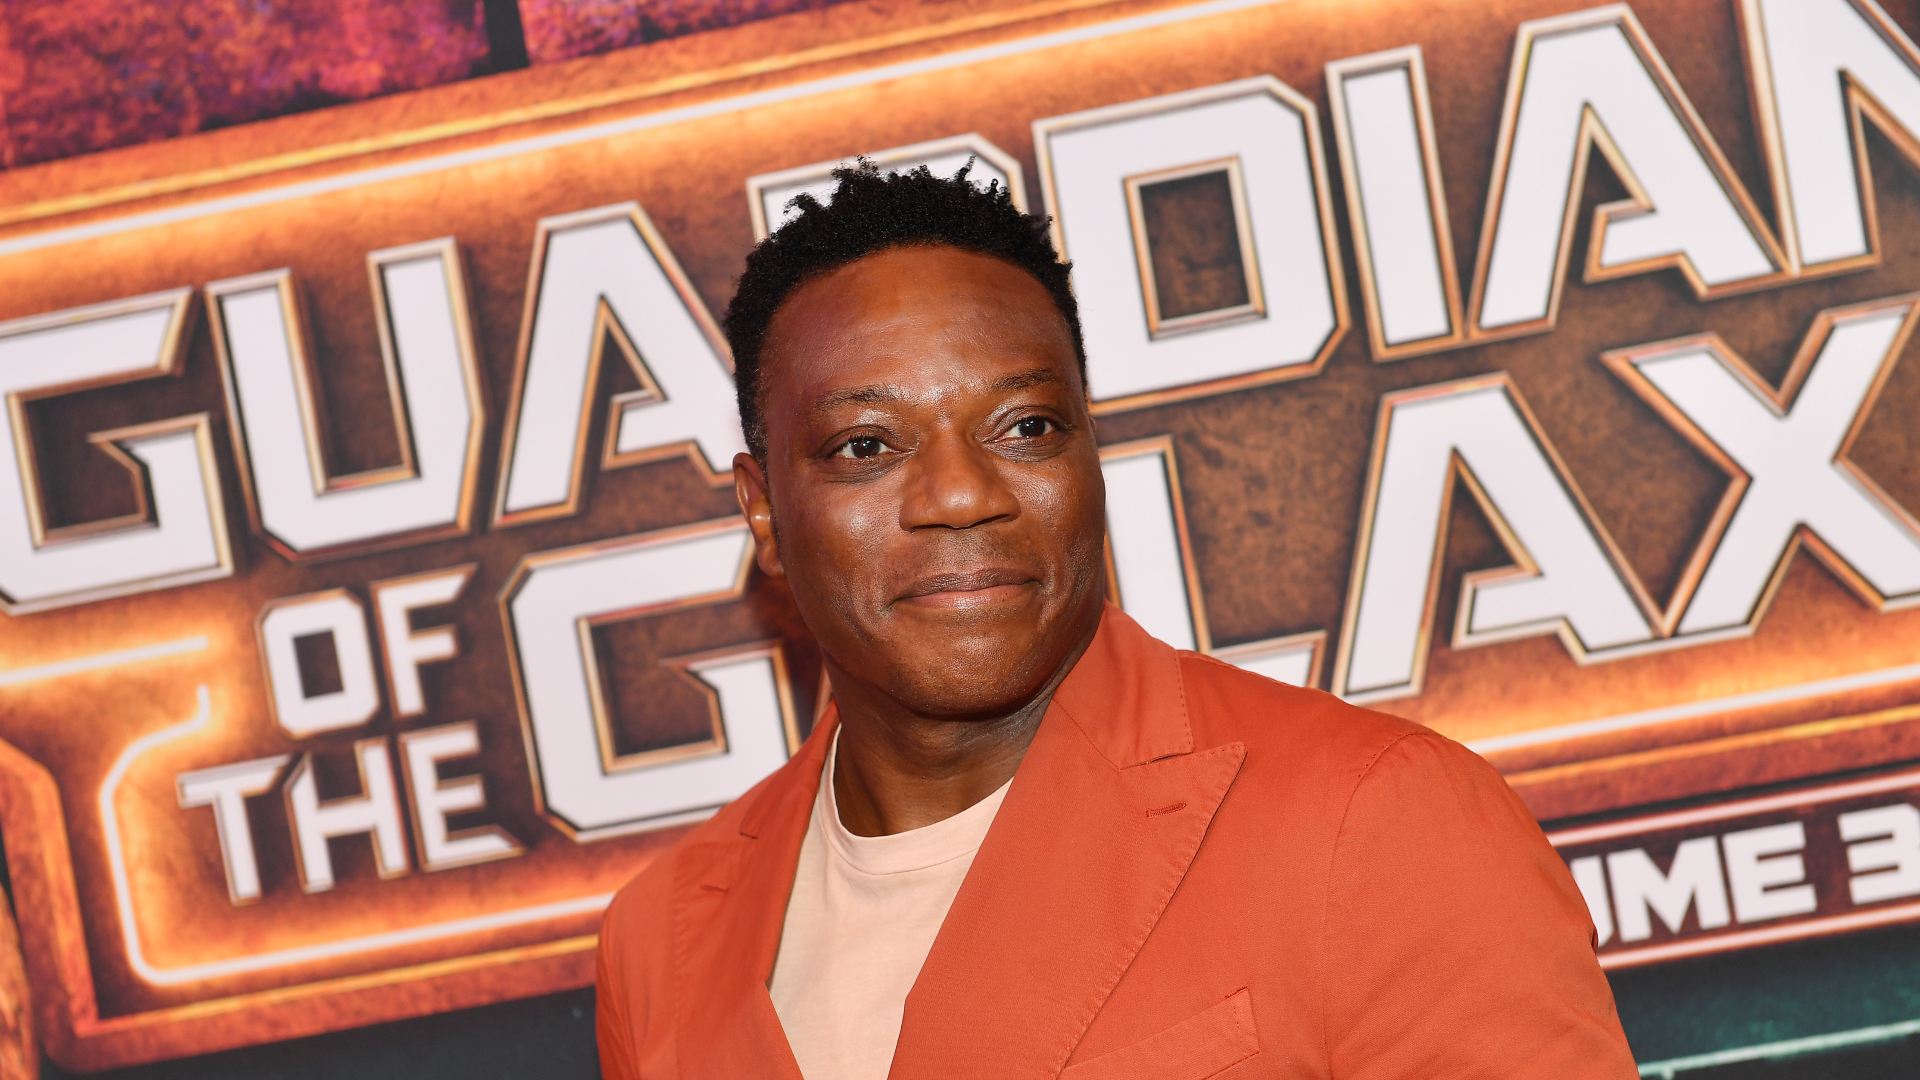 Some Marvel Fans Think ‘Guardians’ Actor Chukwudi Iwuji Should Take Over Kang Role Amid Jonathan Majors Allegations